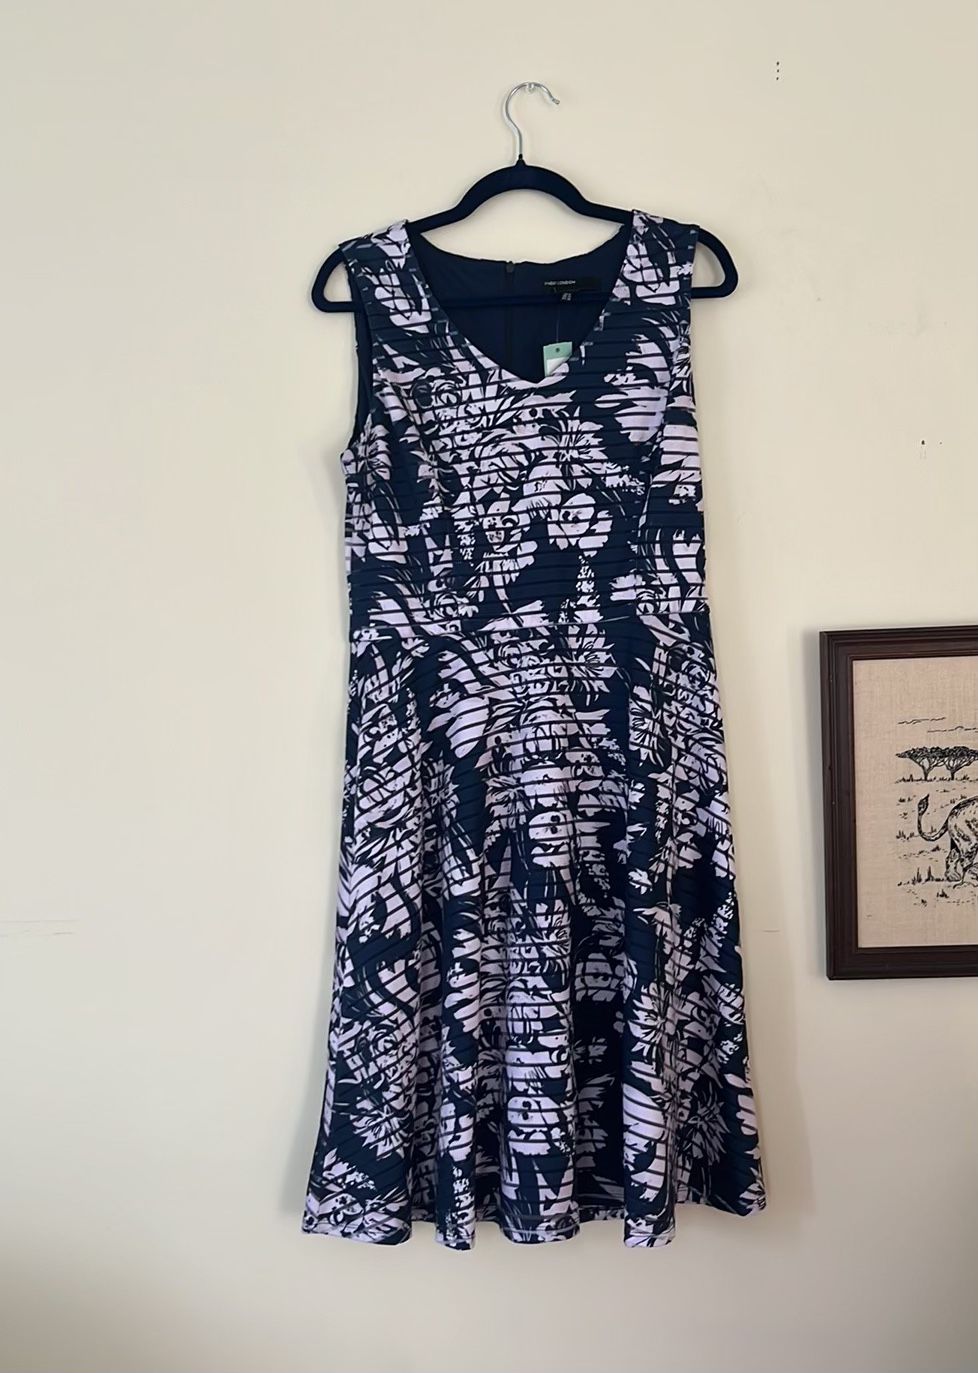 Brand New Maggy London Blue & White Floral Dress - Size 8